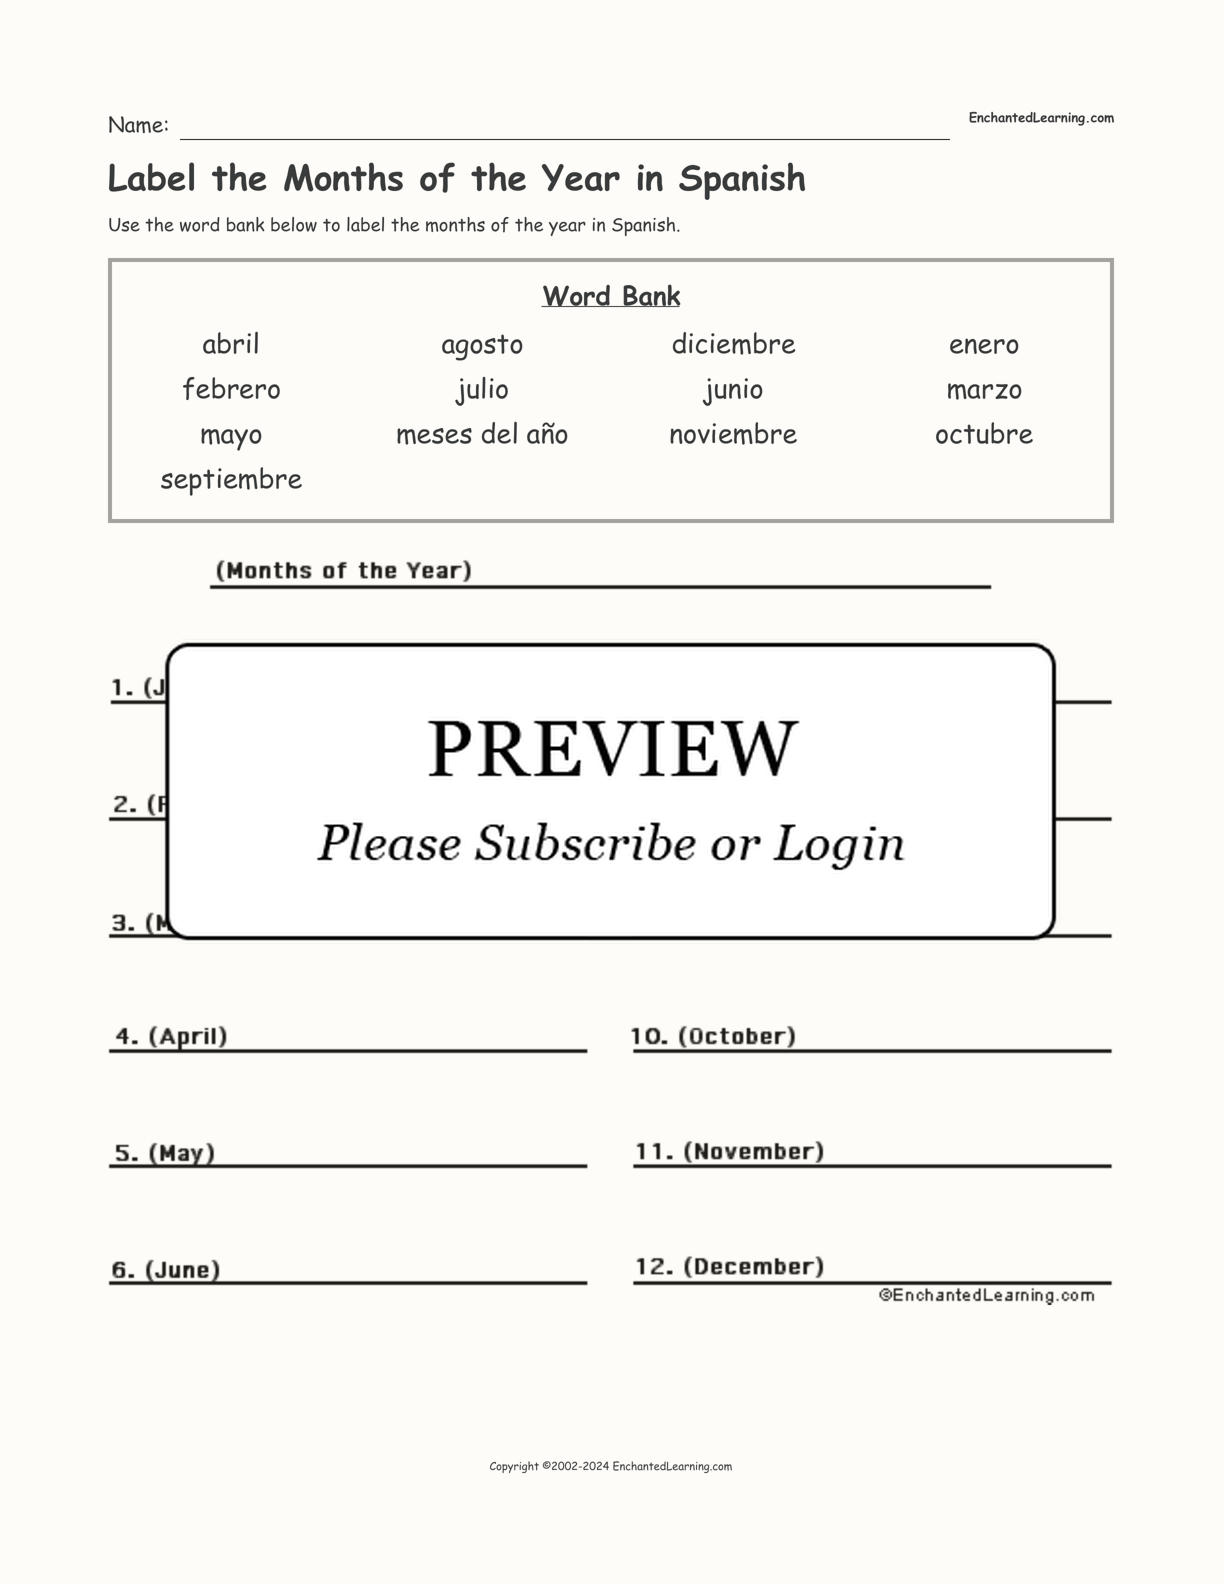 Label the Months of the Year in Spanish interactive worksheet page 1